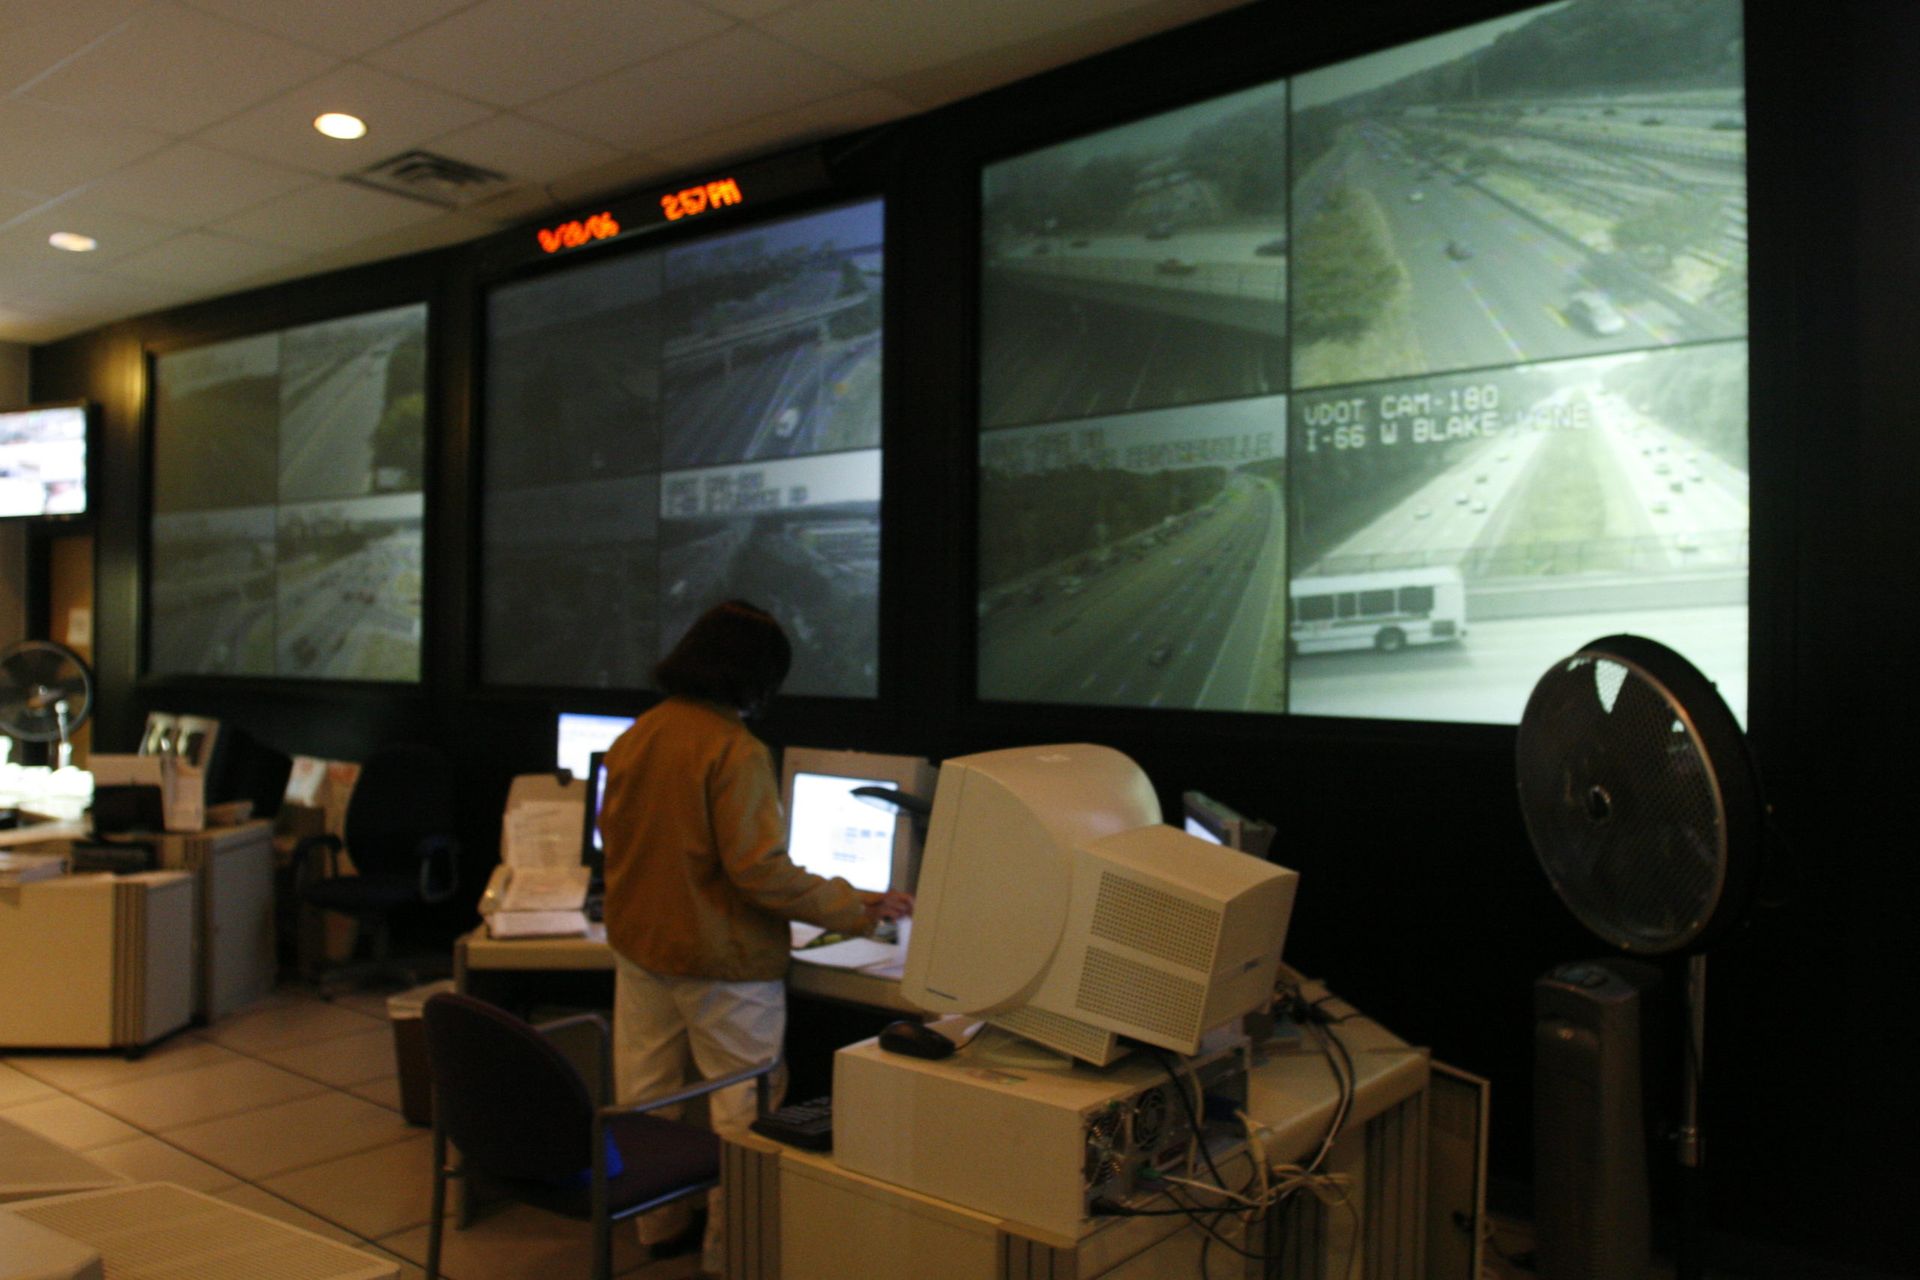 The VDOT staff at the Smart Signal Center in Arlington, Va., spends their hours watching traffic and timing traffic lights accordingly. Intelligent transportation systems are a critical part of smart city efforts around the country. Today’s columnist, Radware’s Michael O’Malley, outlines six tips to lock down security for these massive public-priva...